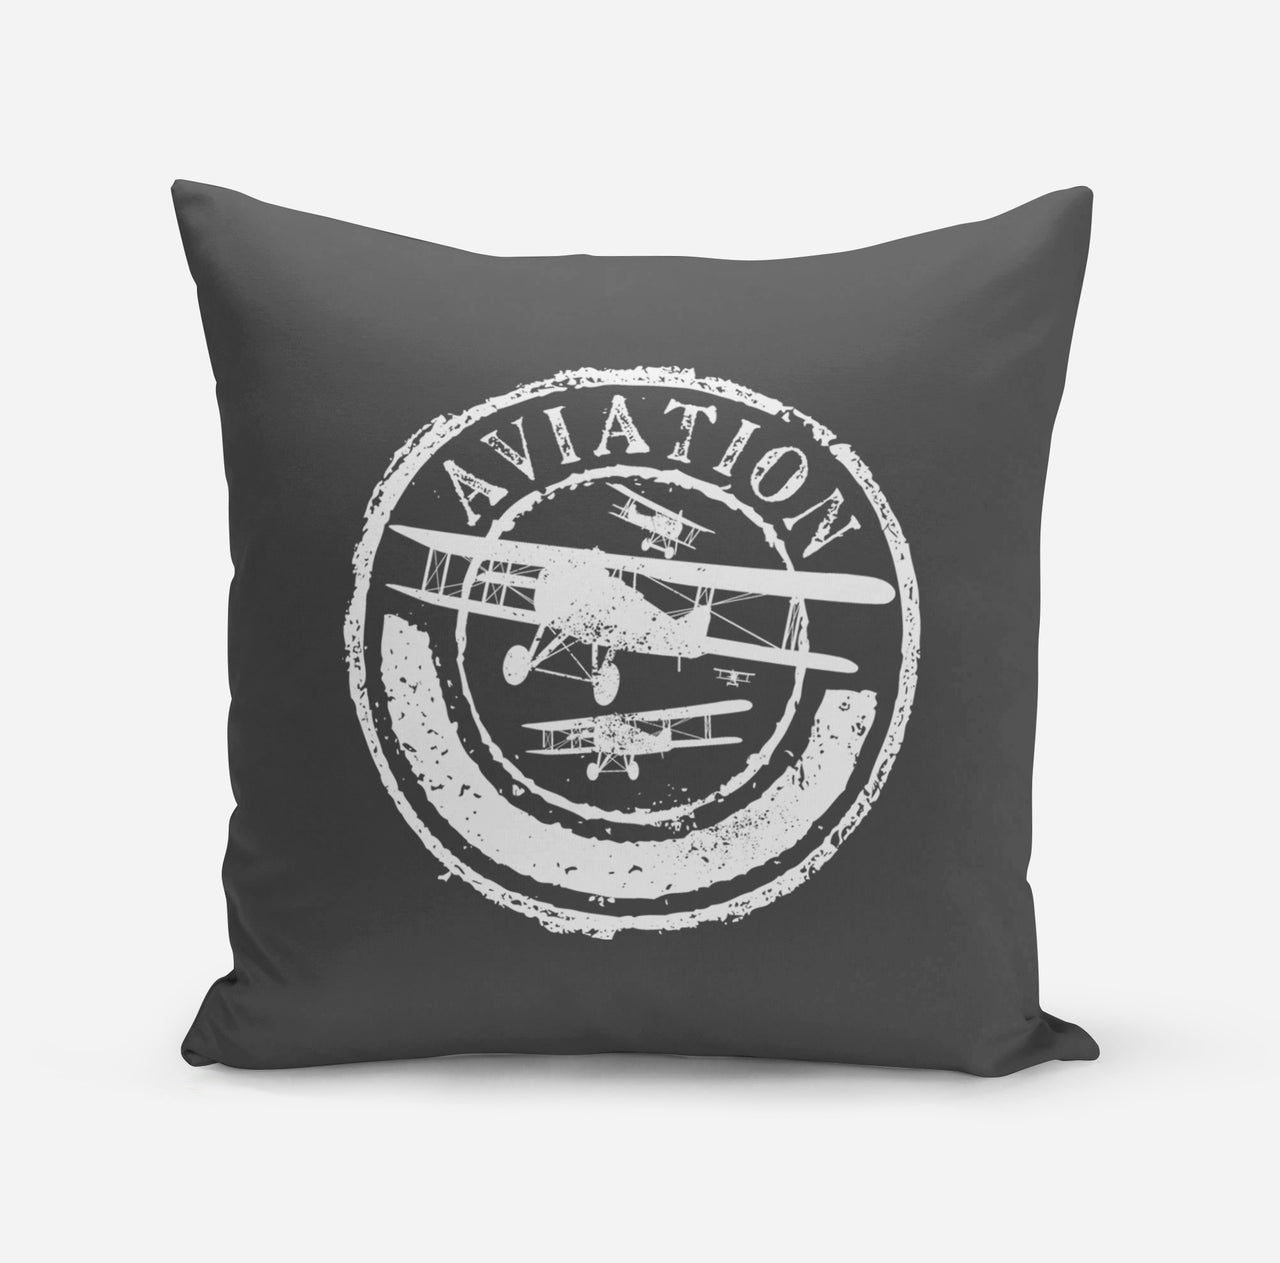 Aviation Lovers Designed Pillows